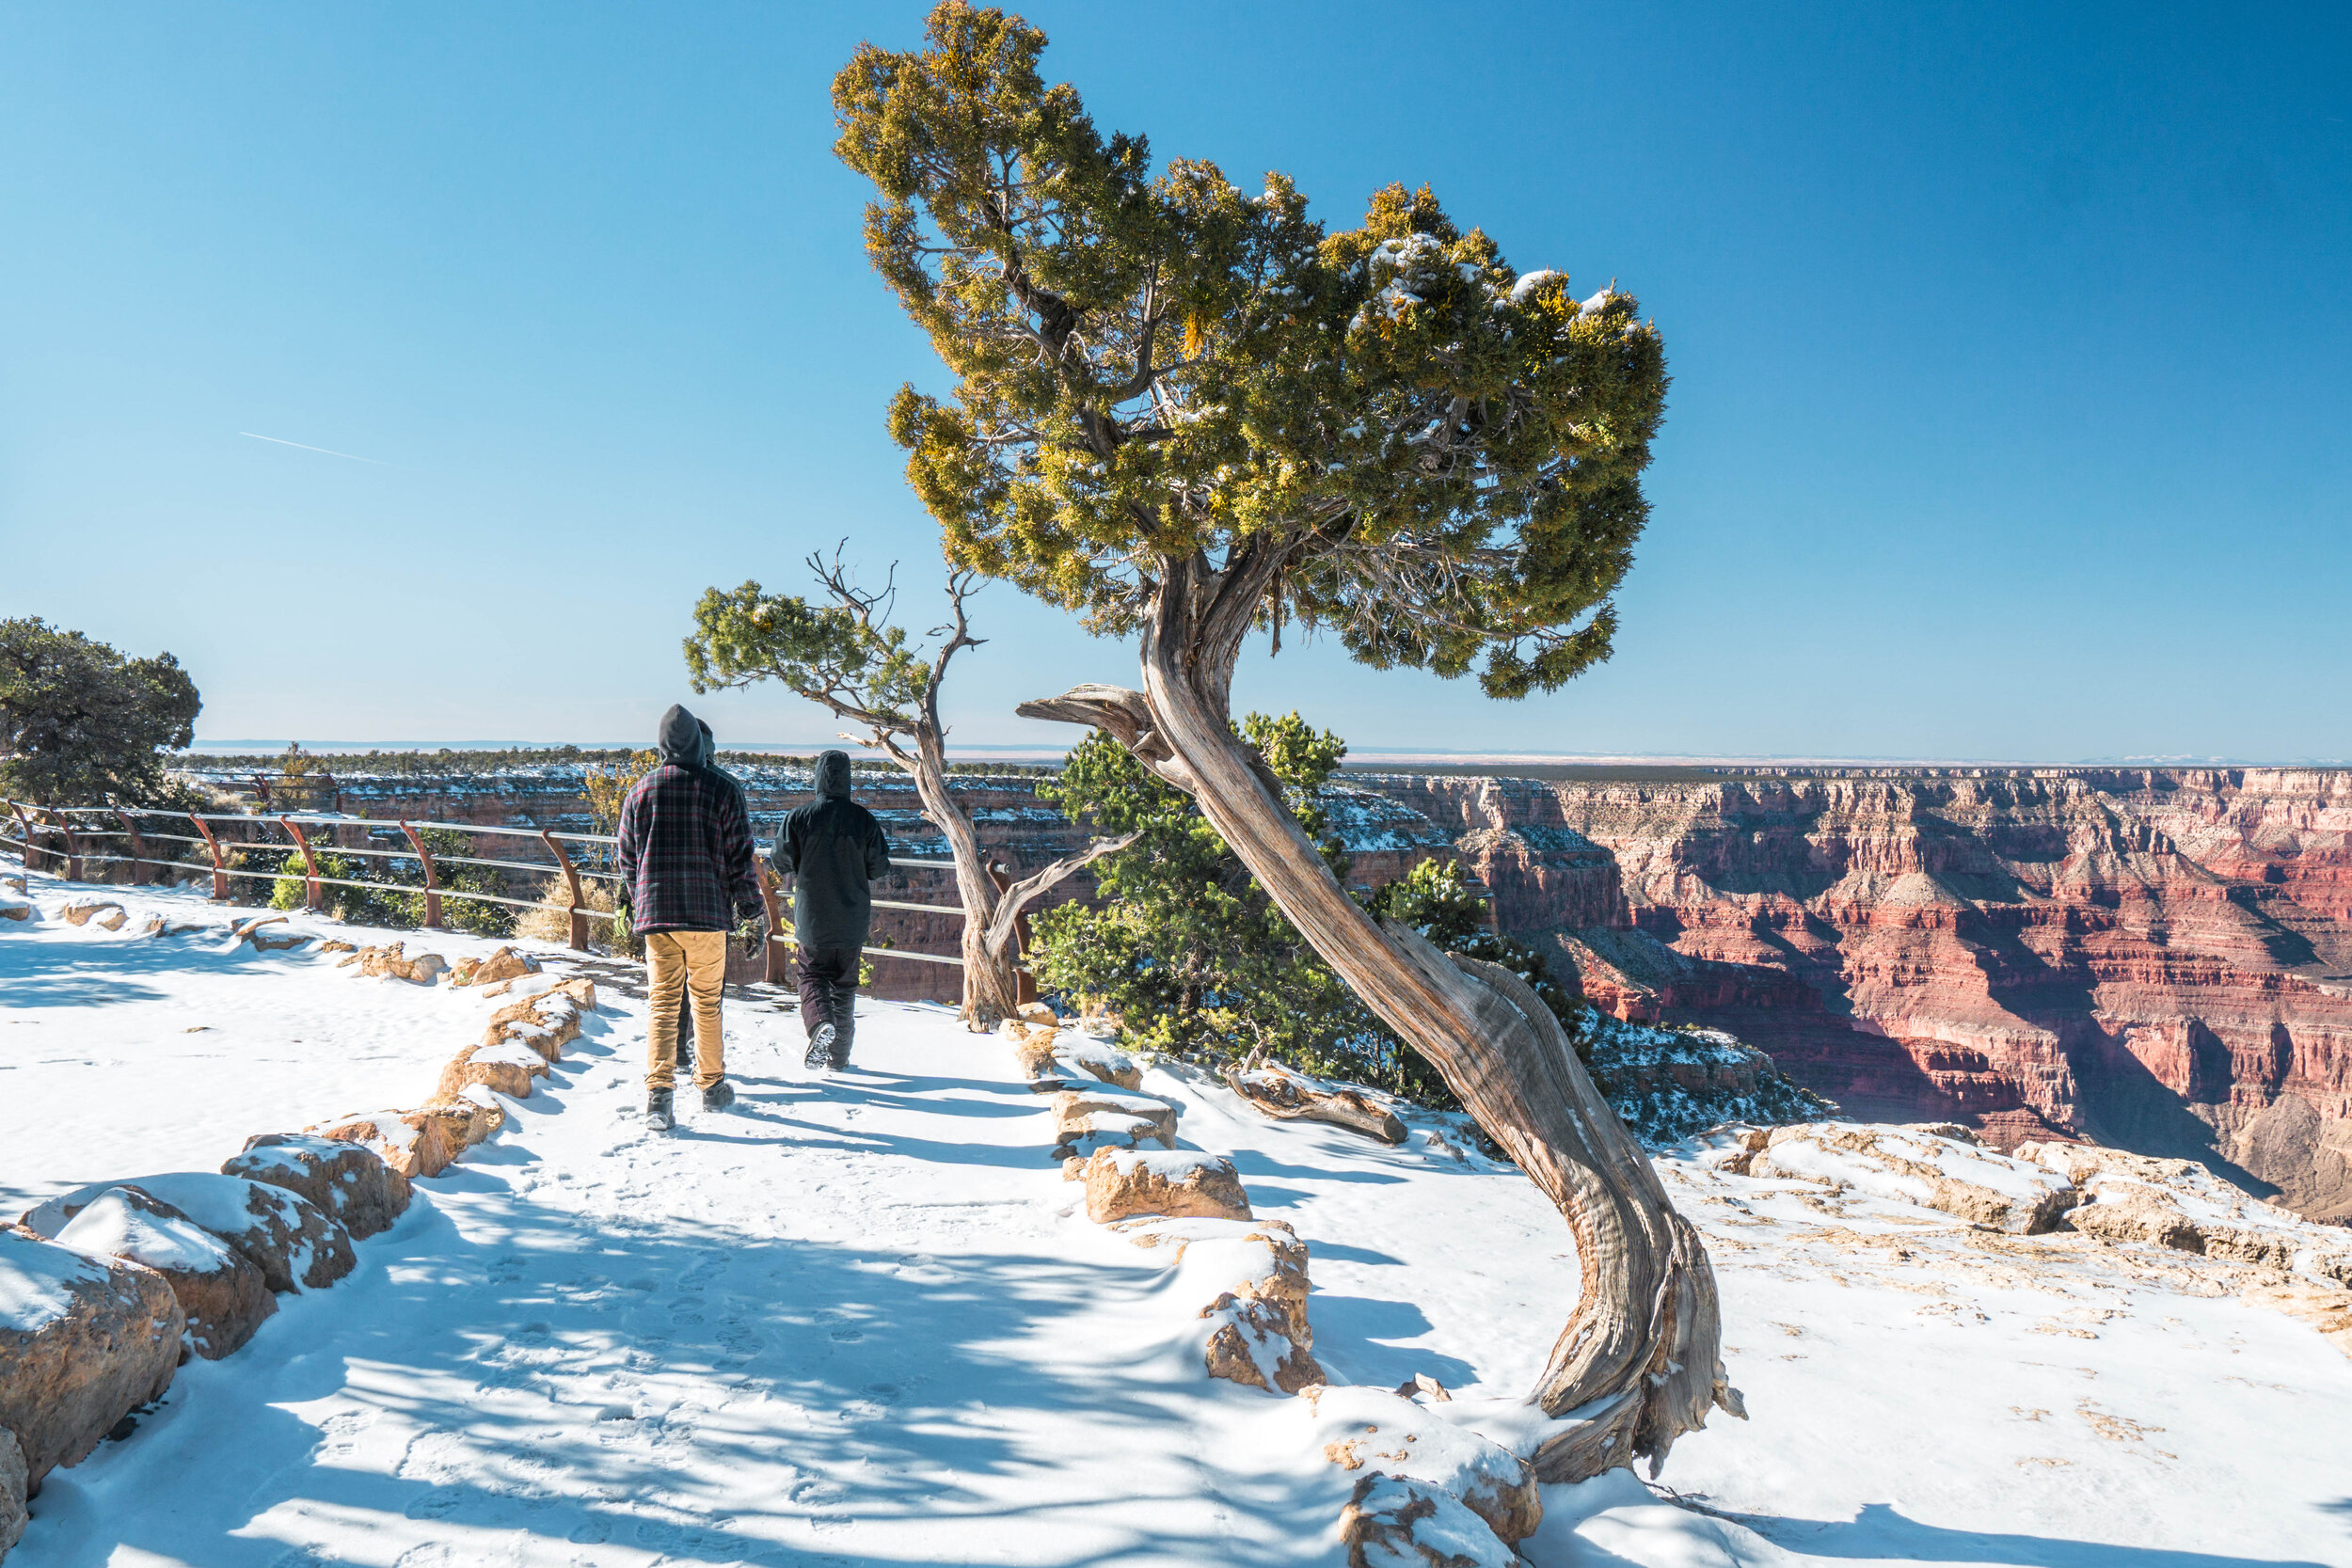 Once set to more serious matters, we ventured along a new stretch of the Grand Canyon rim.